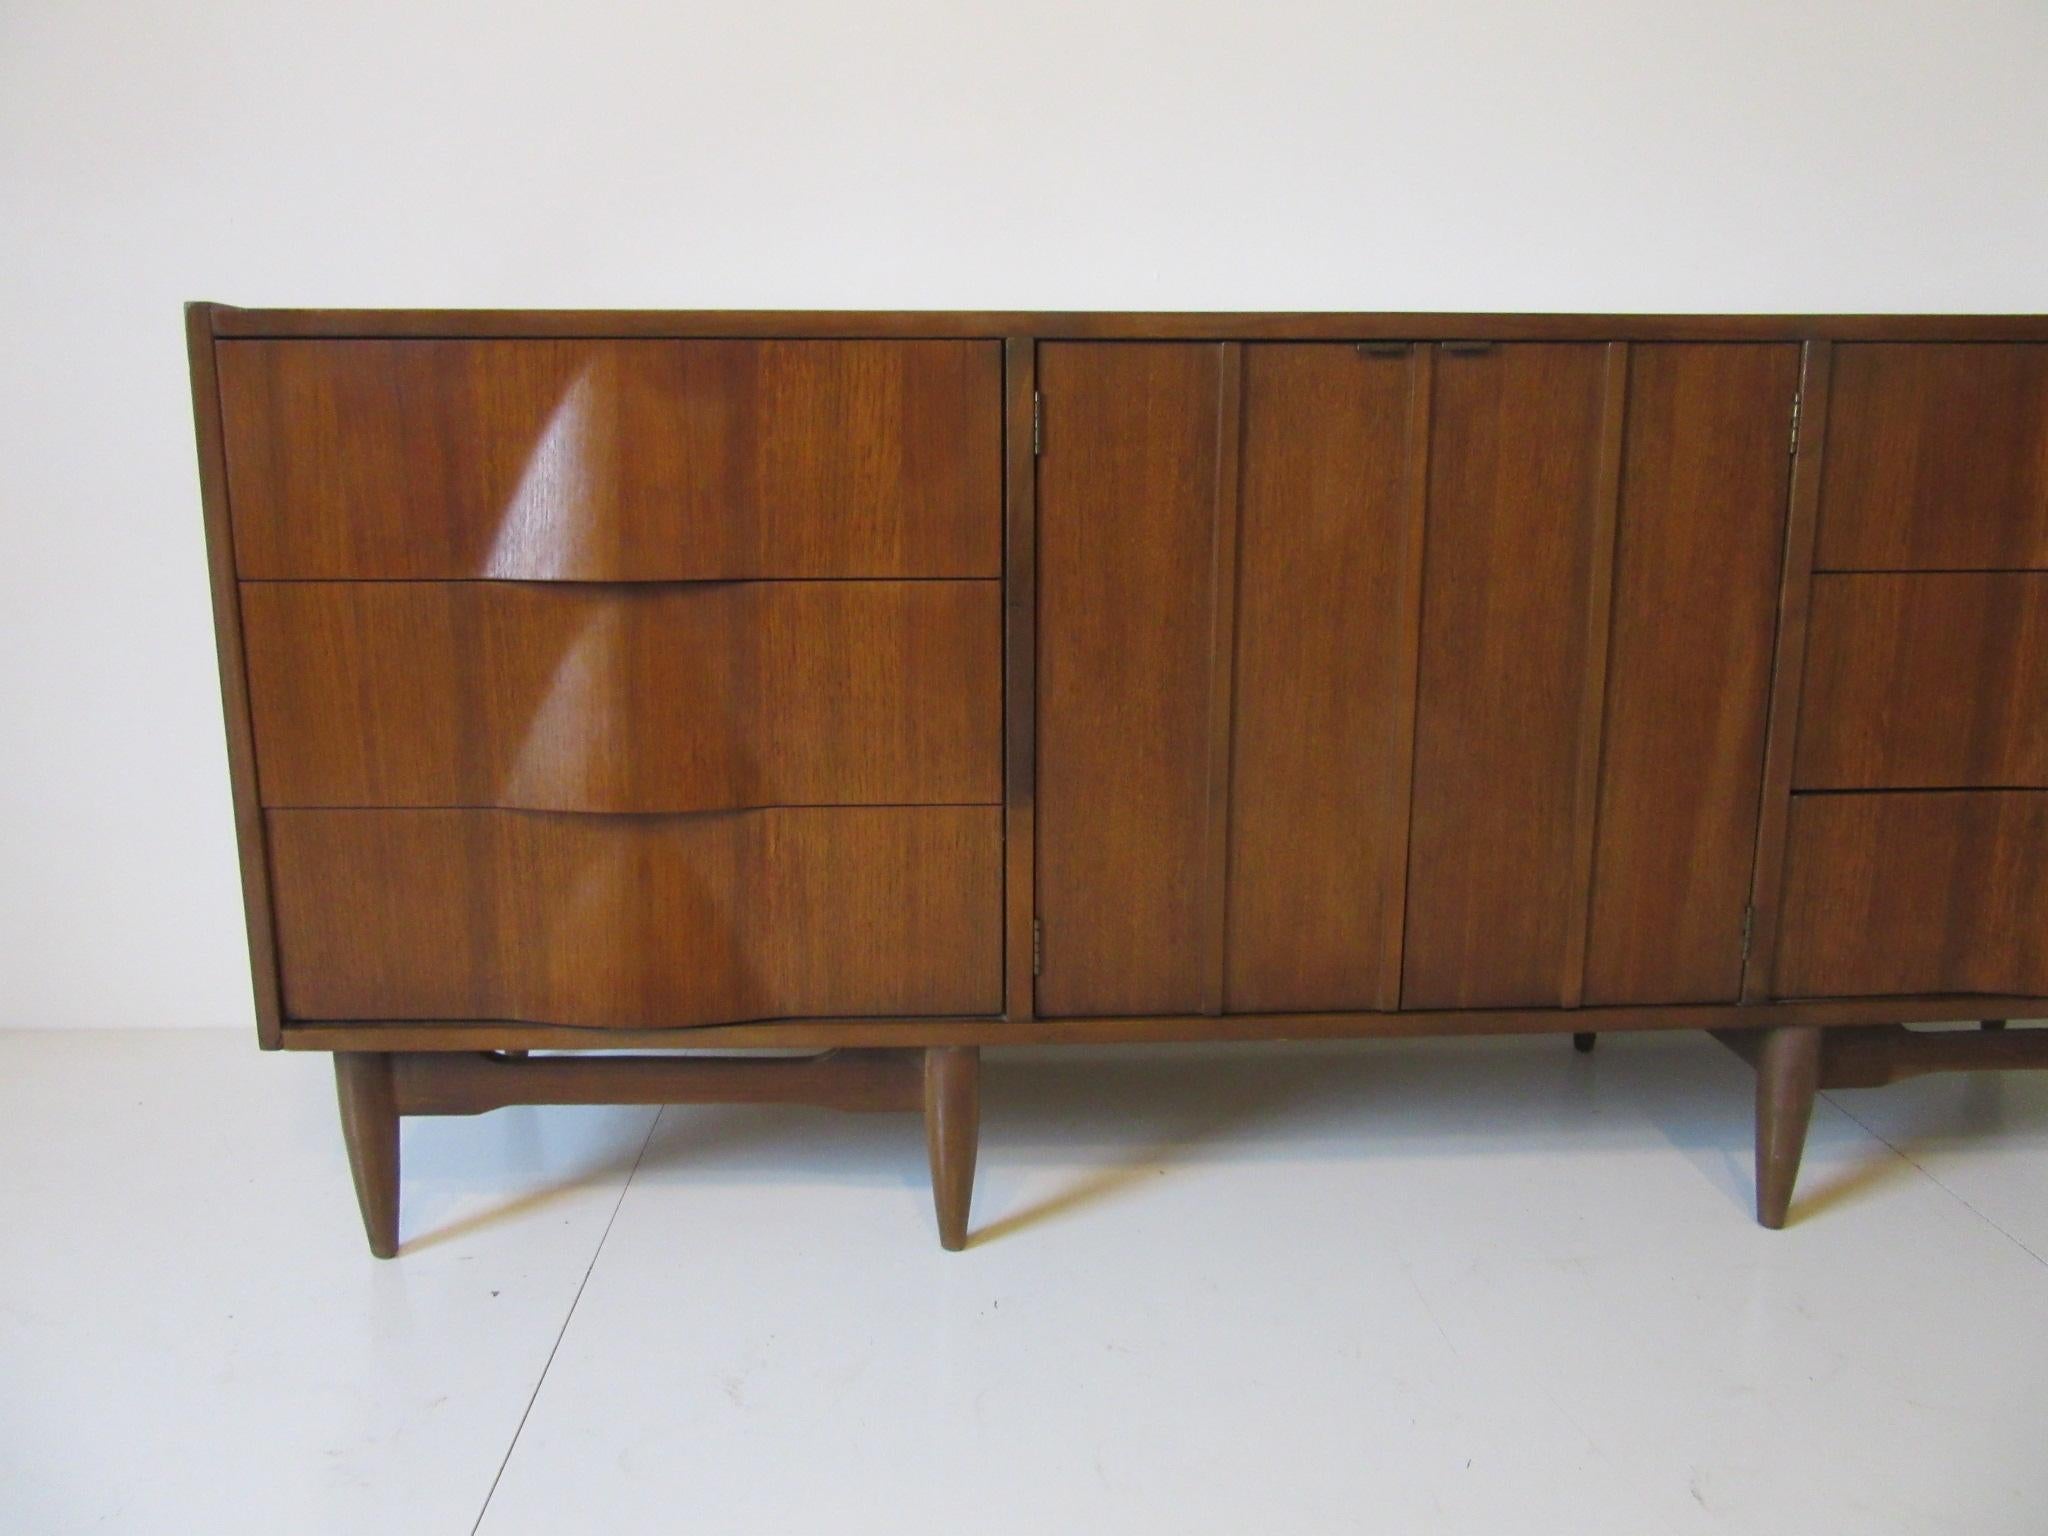 A well grained midcentury walnut dresser chest with six side drawers and two middle doors reveling three additional drawers. The sculptural design incorporates the pulls to each outer drawer front giving this piece an organic vibe in the manner of